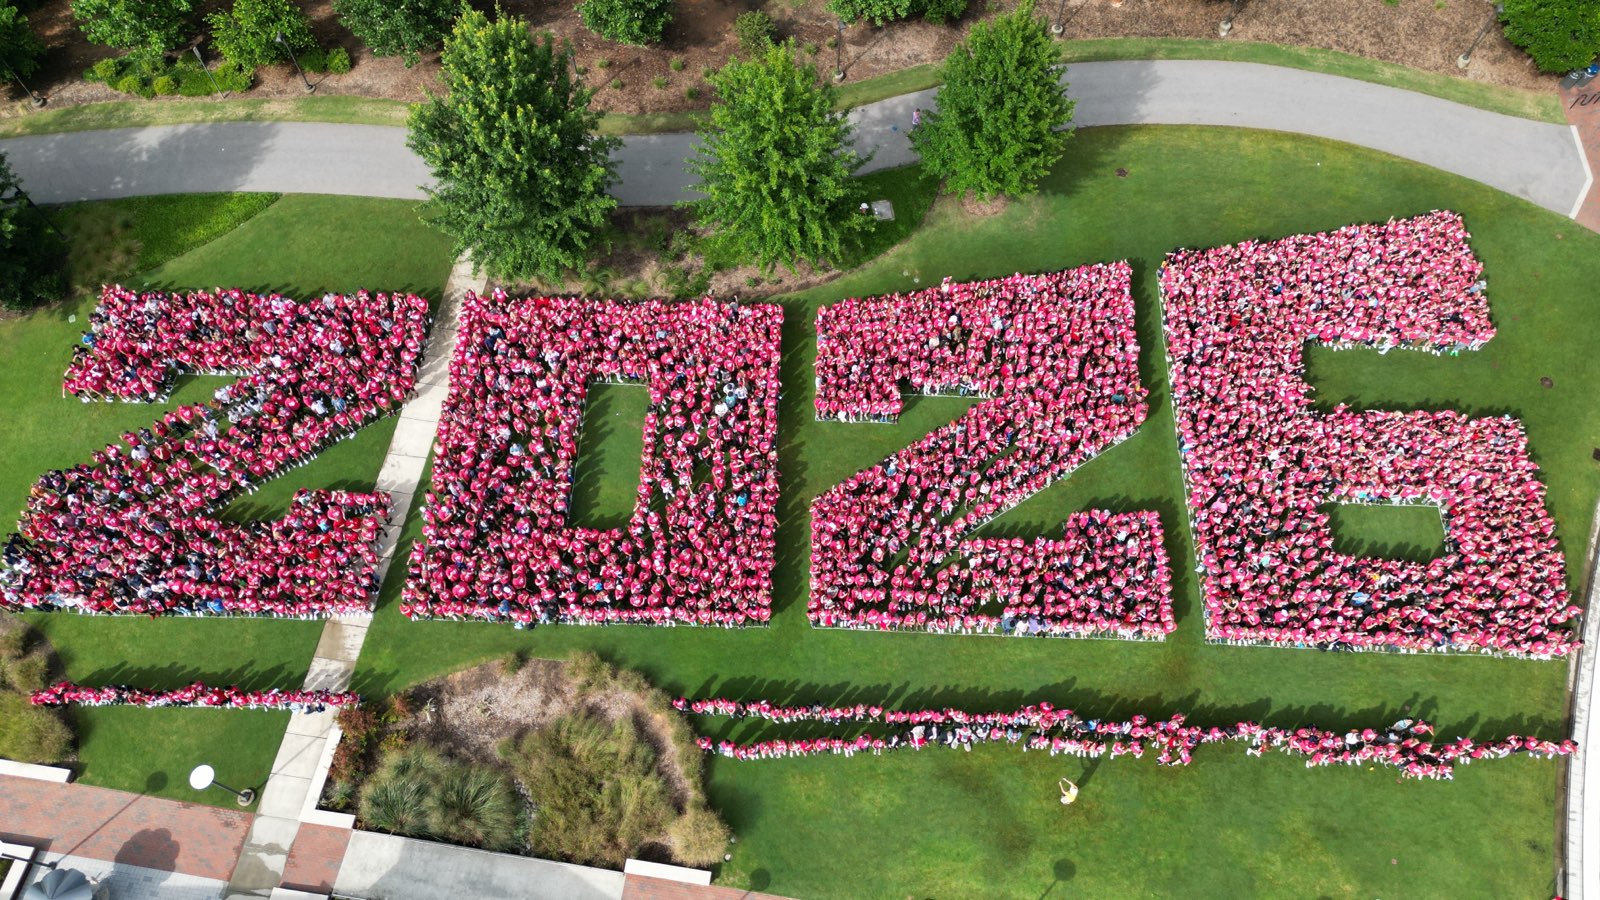 The Class of 2026 takes part in an annual Wolfpack Welcome Week tradition: posing for their class photo. An aerial shot shows students forming the shape of their graduating year, 2026.